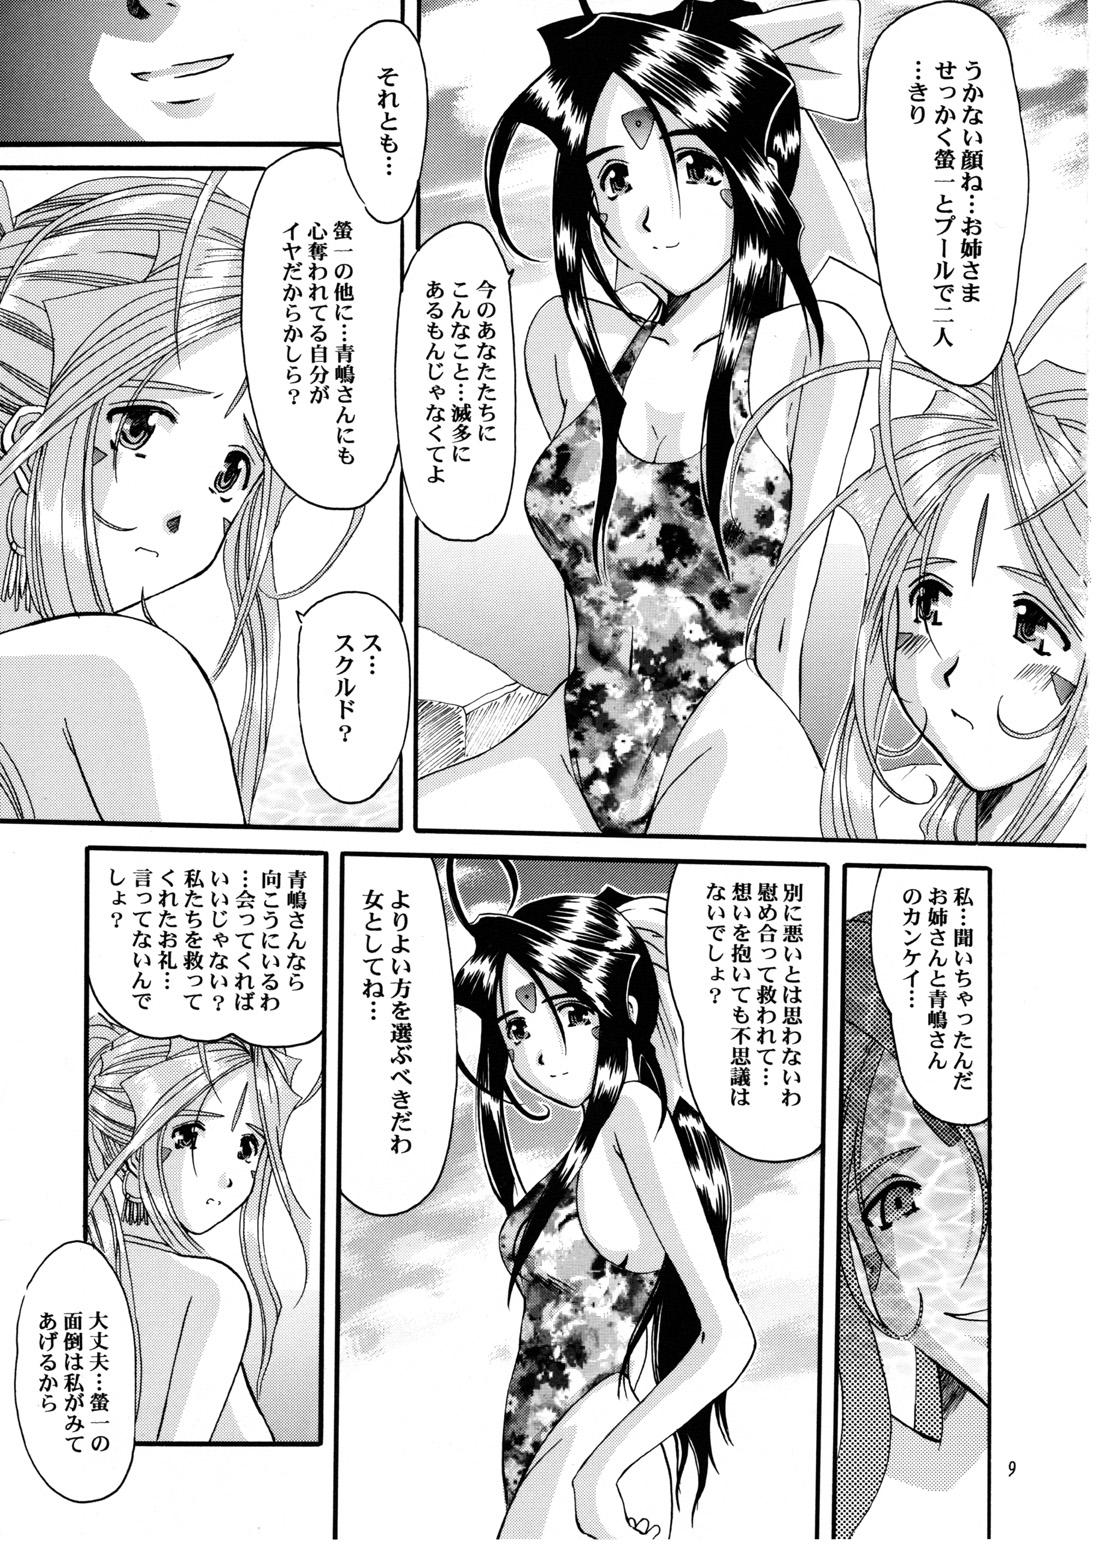 Funk Nightmare of My Goddess Summer Interval - Ah my goddess Tites - Page 9